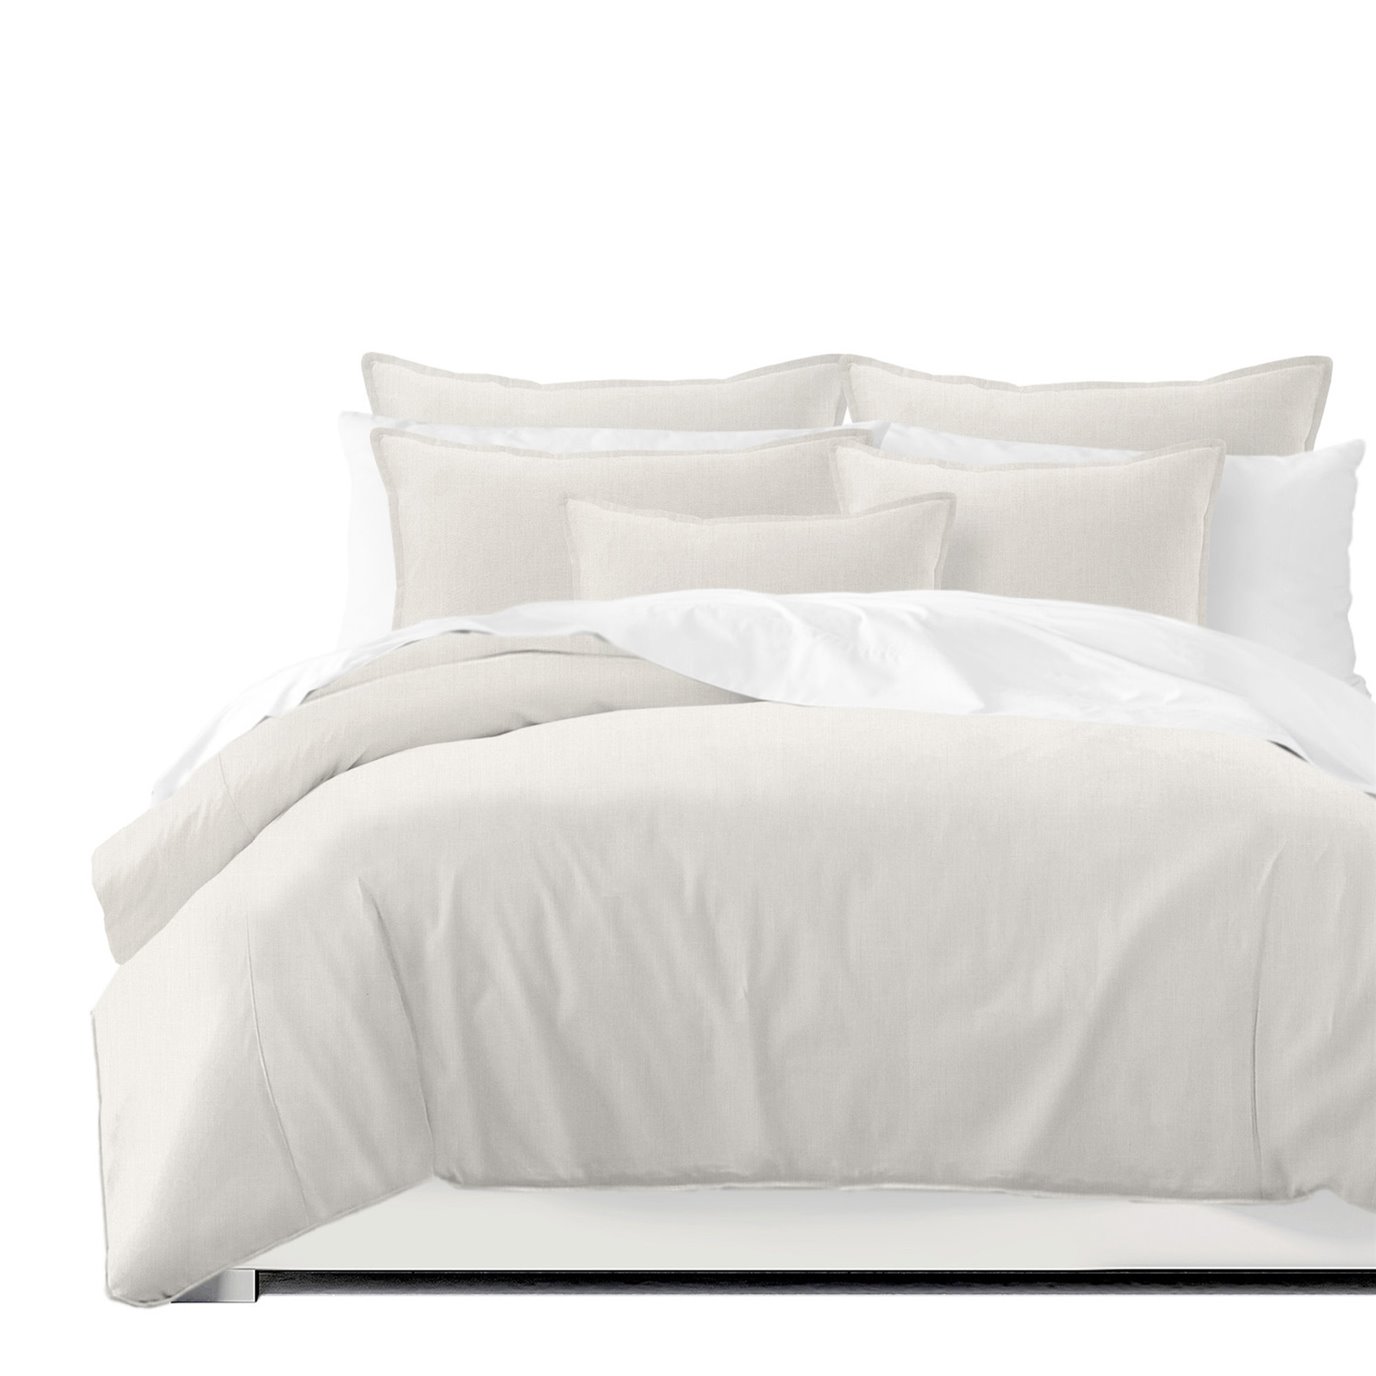 Sutton Pearl Comforter and Pillow Sham(s) Set - Size Super King